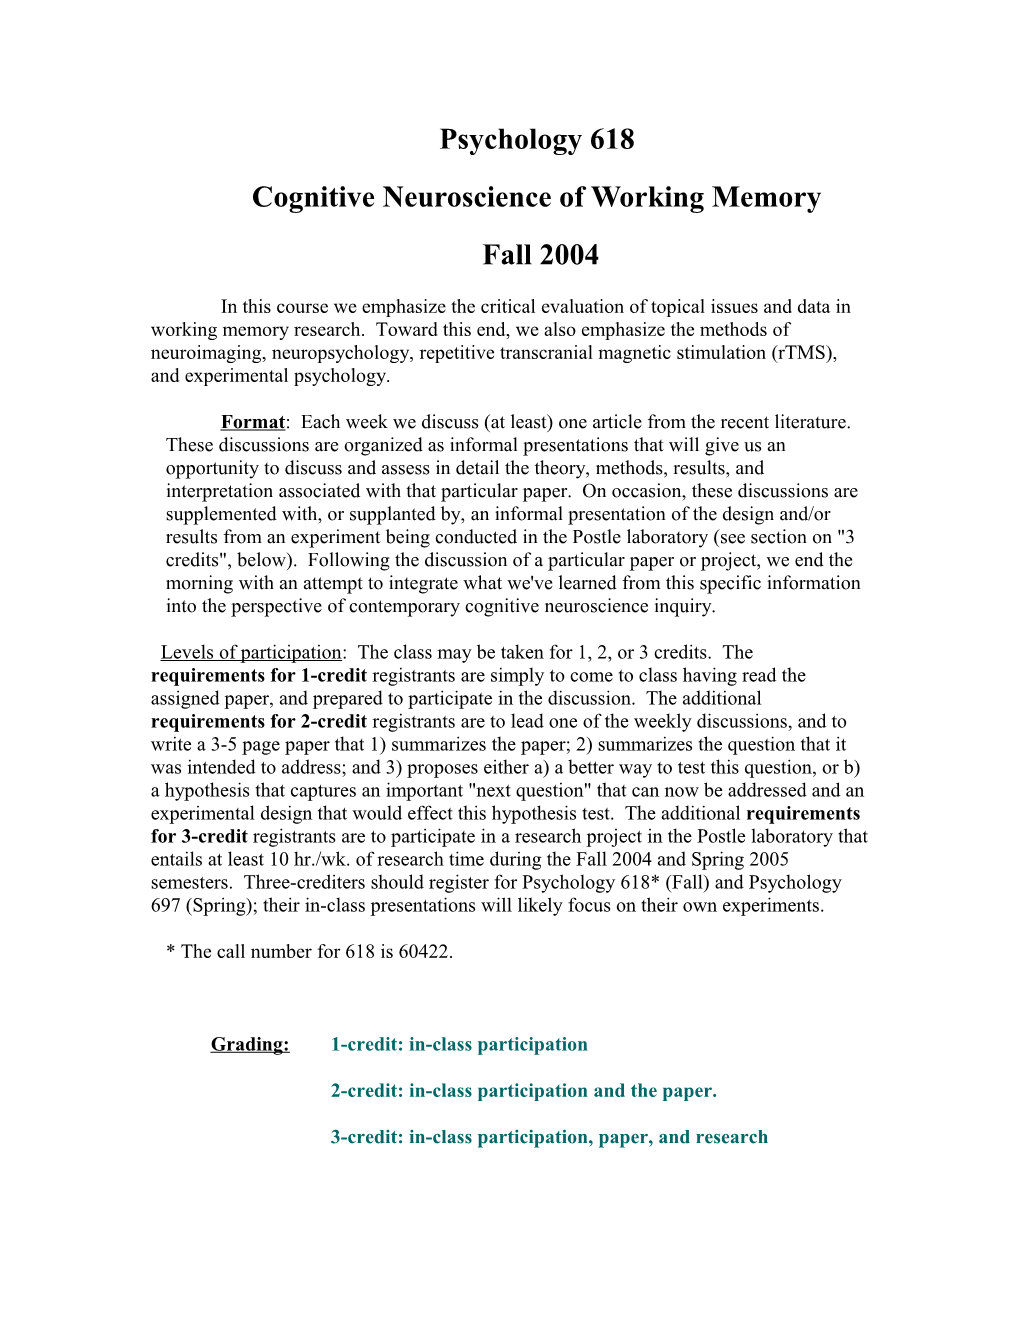 Cognitive Neuroscience of Working Memory